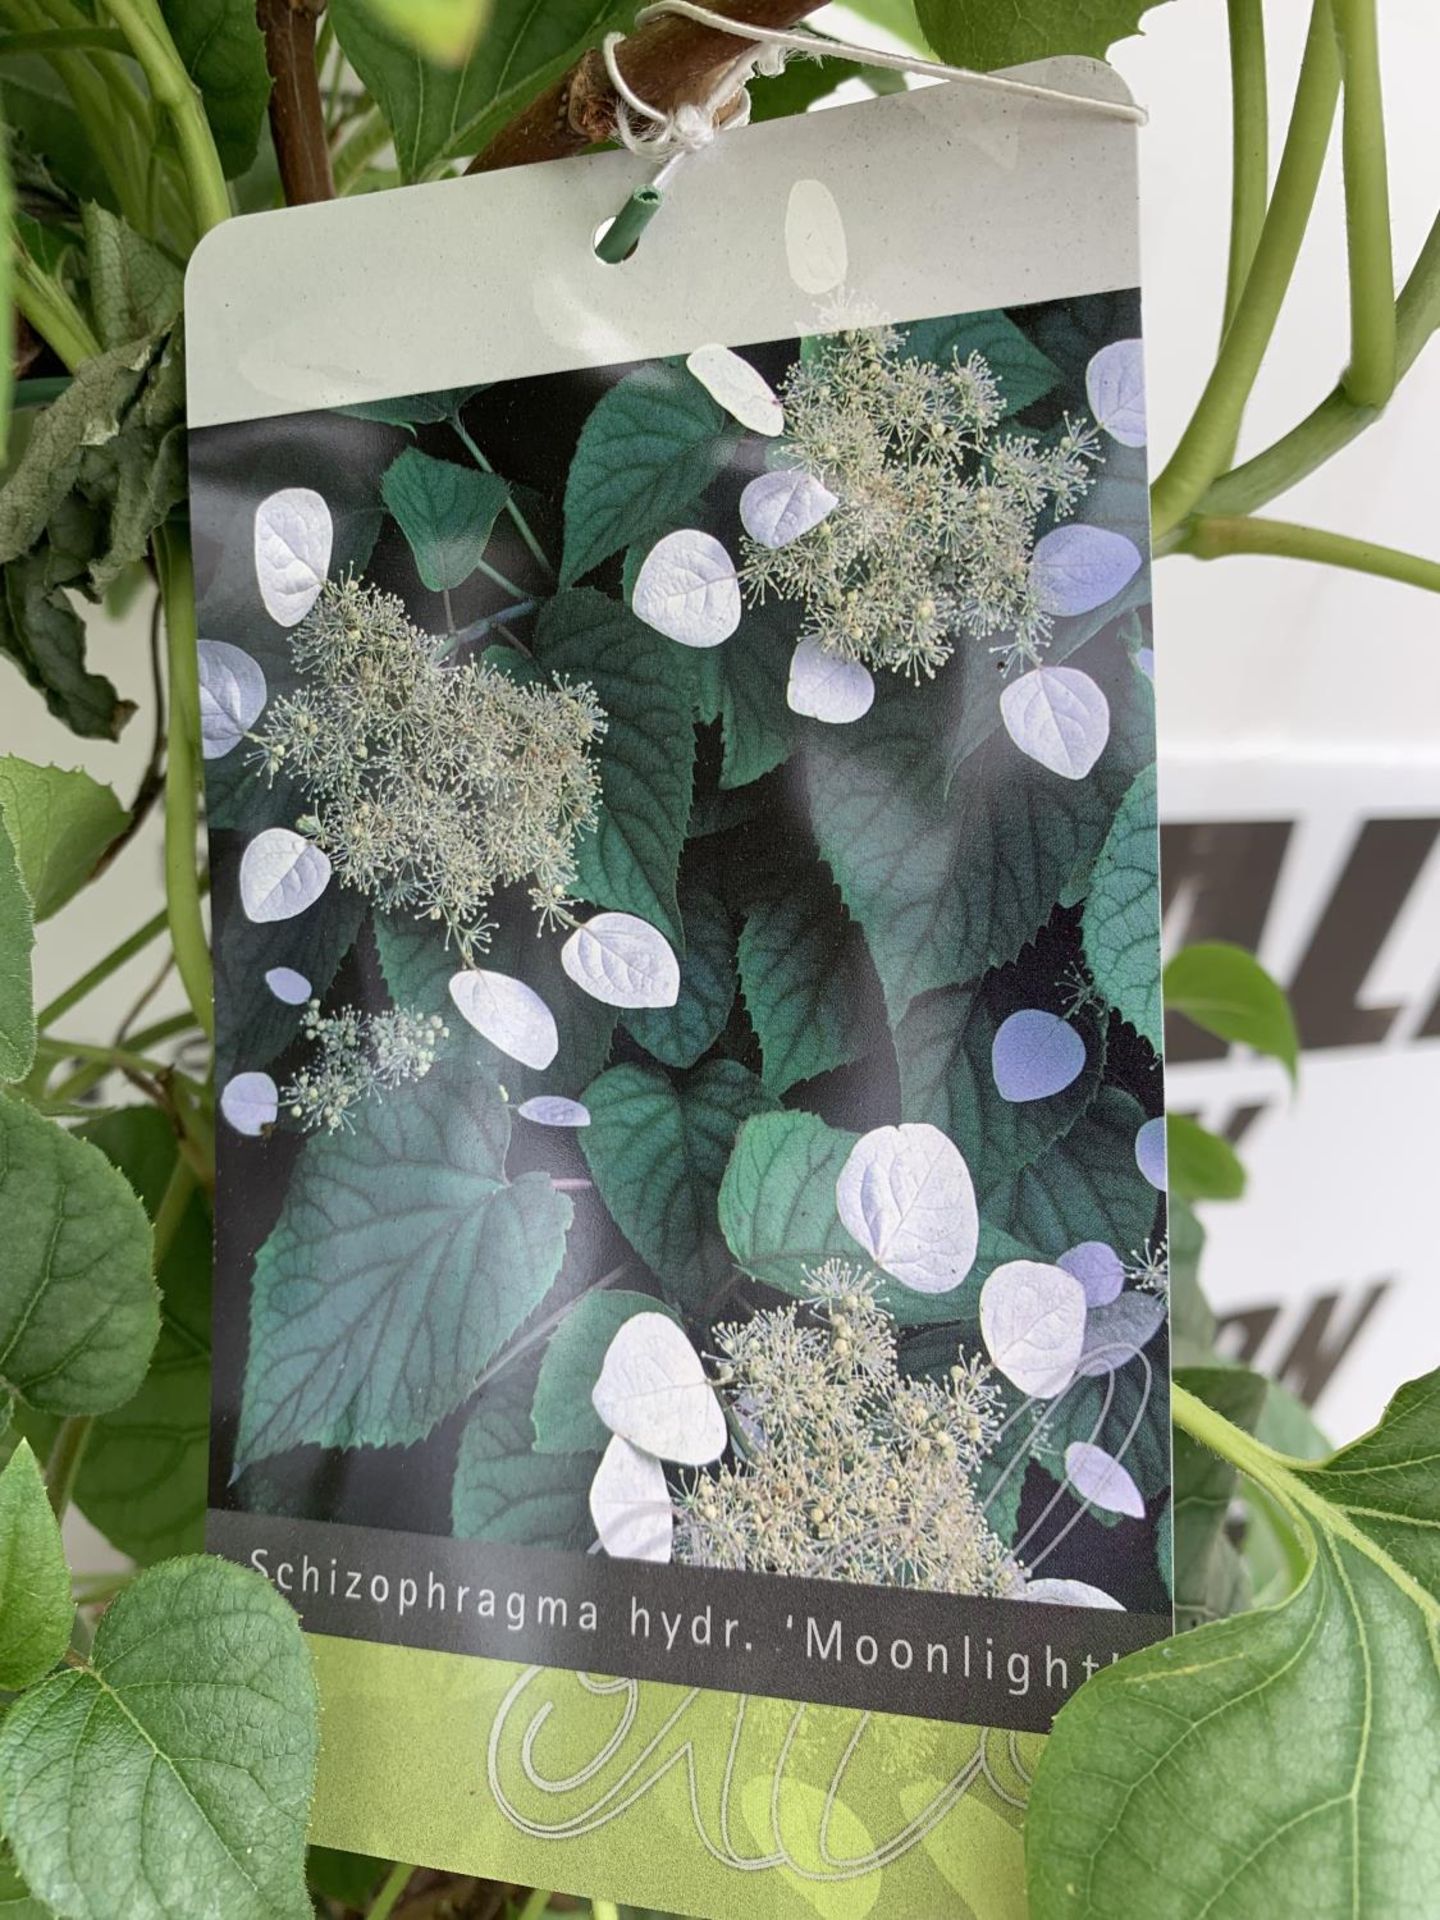 A SCHIZOPHRAGMA HYDRANGEA 'MOONLIGHT' IN A 7.5 LTR POT 120CM IN HEIGHT PLUS VAT - Image 7 of 8